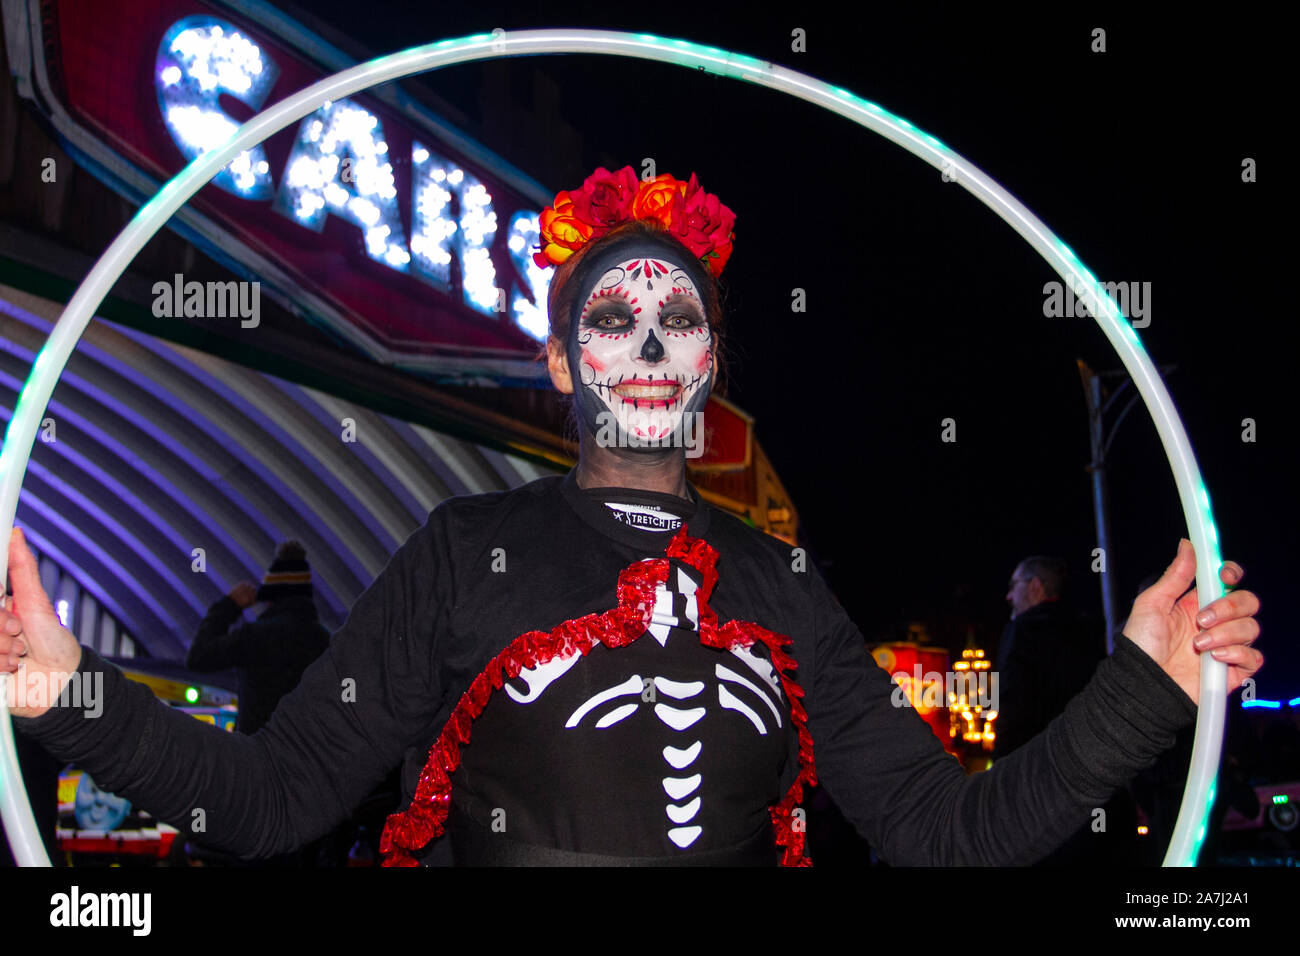 Skull Face Mask Ghost Bones Southport, Merseyside. Nov, 2019. ' Bring on the fire project' display at the Day Of The Dead' Festival – November is the host month to Mexico's Day of the Dead – and Southport Pleasureland staged its own twist on the spooky Mexican celebration with explosive cascade of colours and patterns created while dancing and moving with light and vibrant revelry in a feast for the senses.  A host of fantastic entertainment & celebrations brought thousands of tourists to the resort to enjoy the spectacle. Credit; MediaWorldImages/AlamyLiveNews Stock Photo